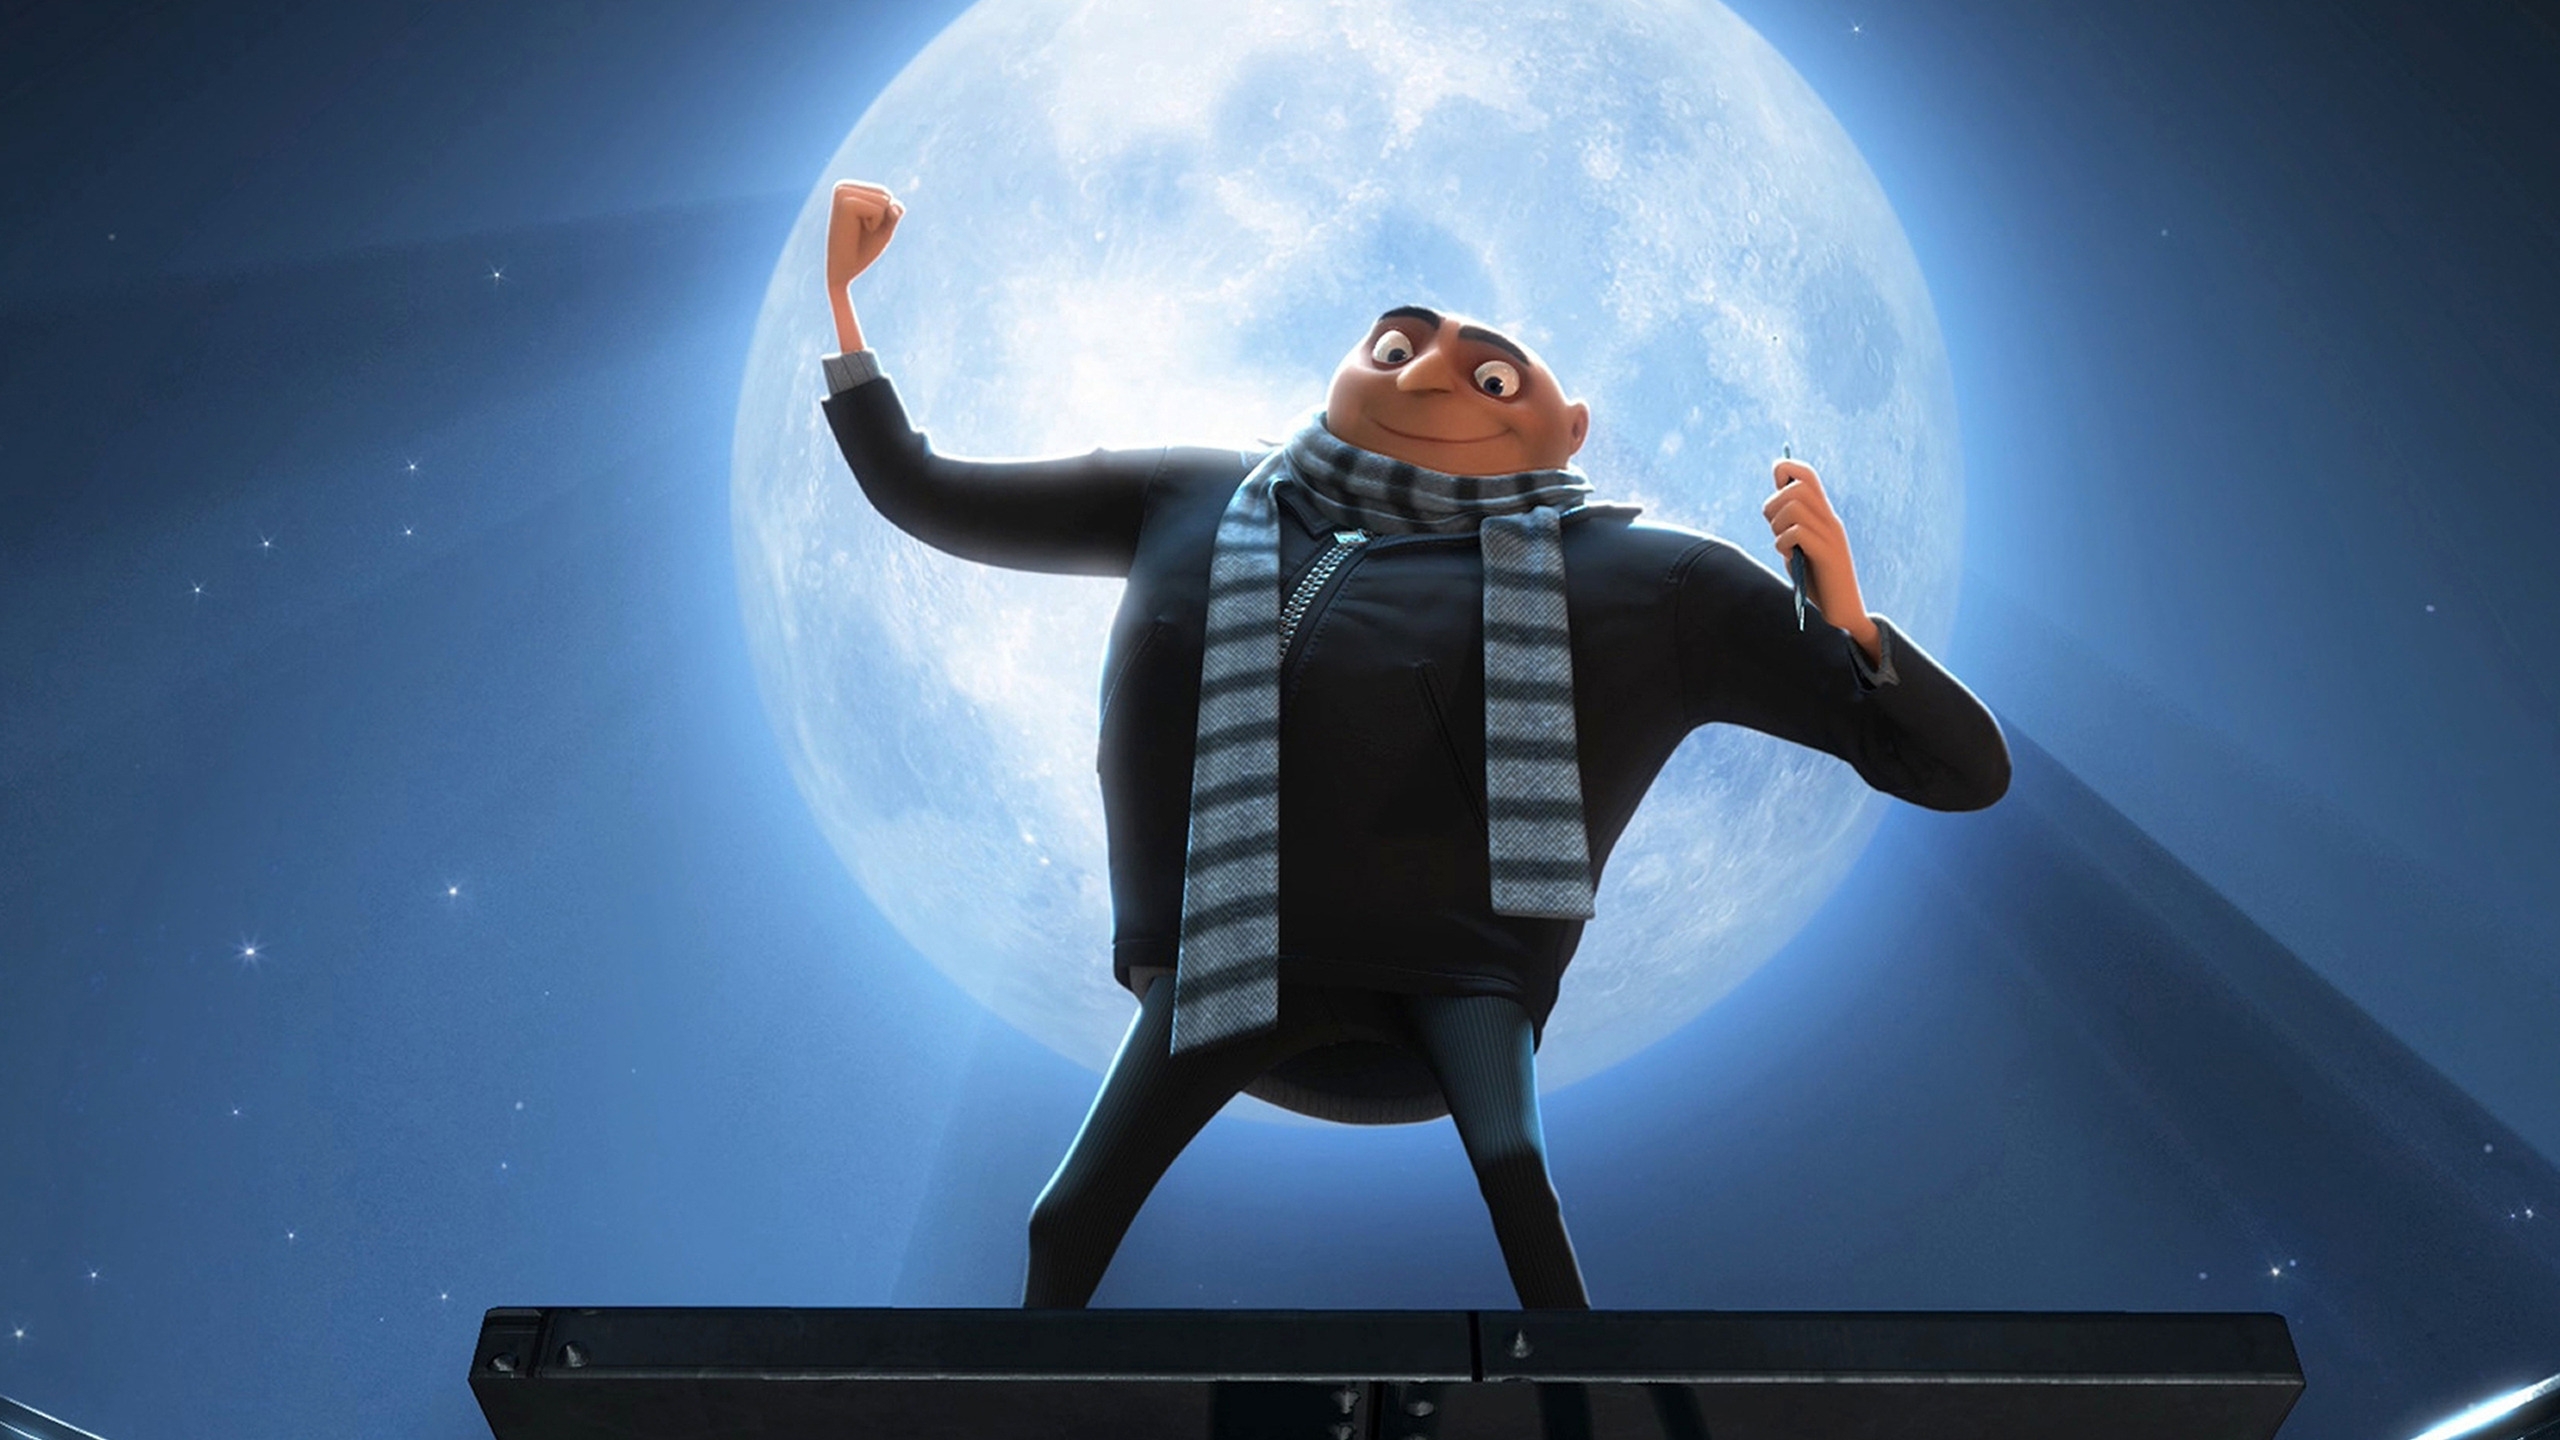 Despicable Me Gru for 2560x1440 HDTV resolution